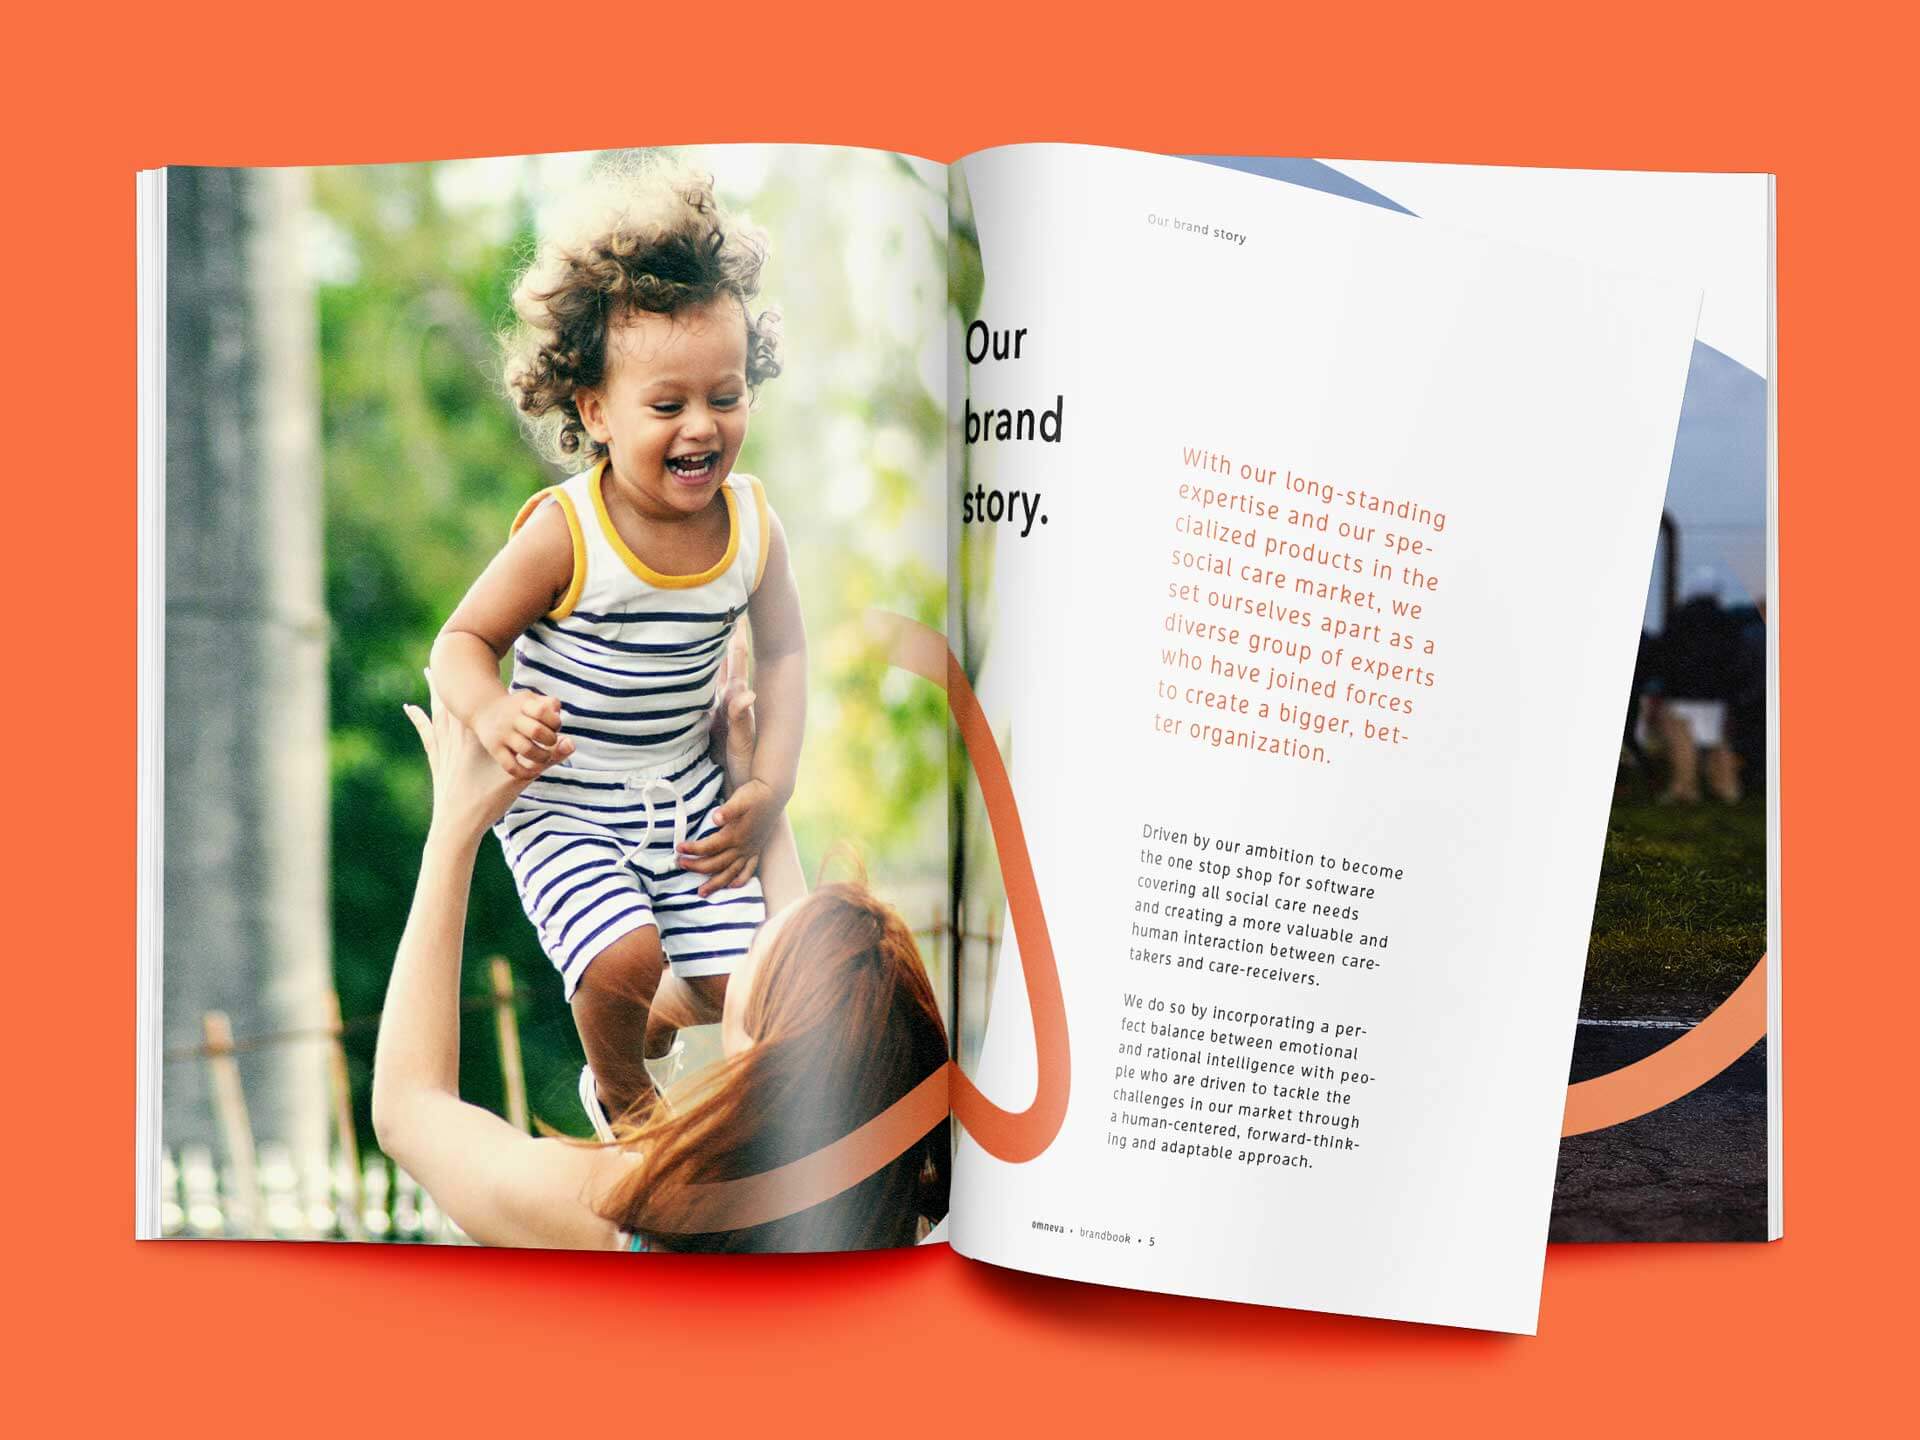 Spread with the Brand Story in the Brandbook for Omneva.